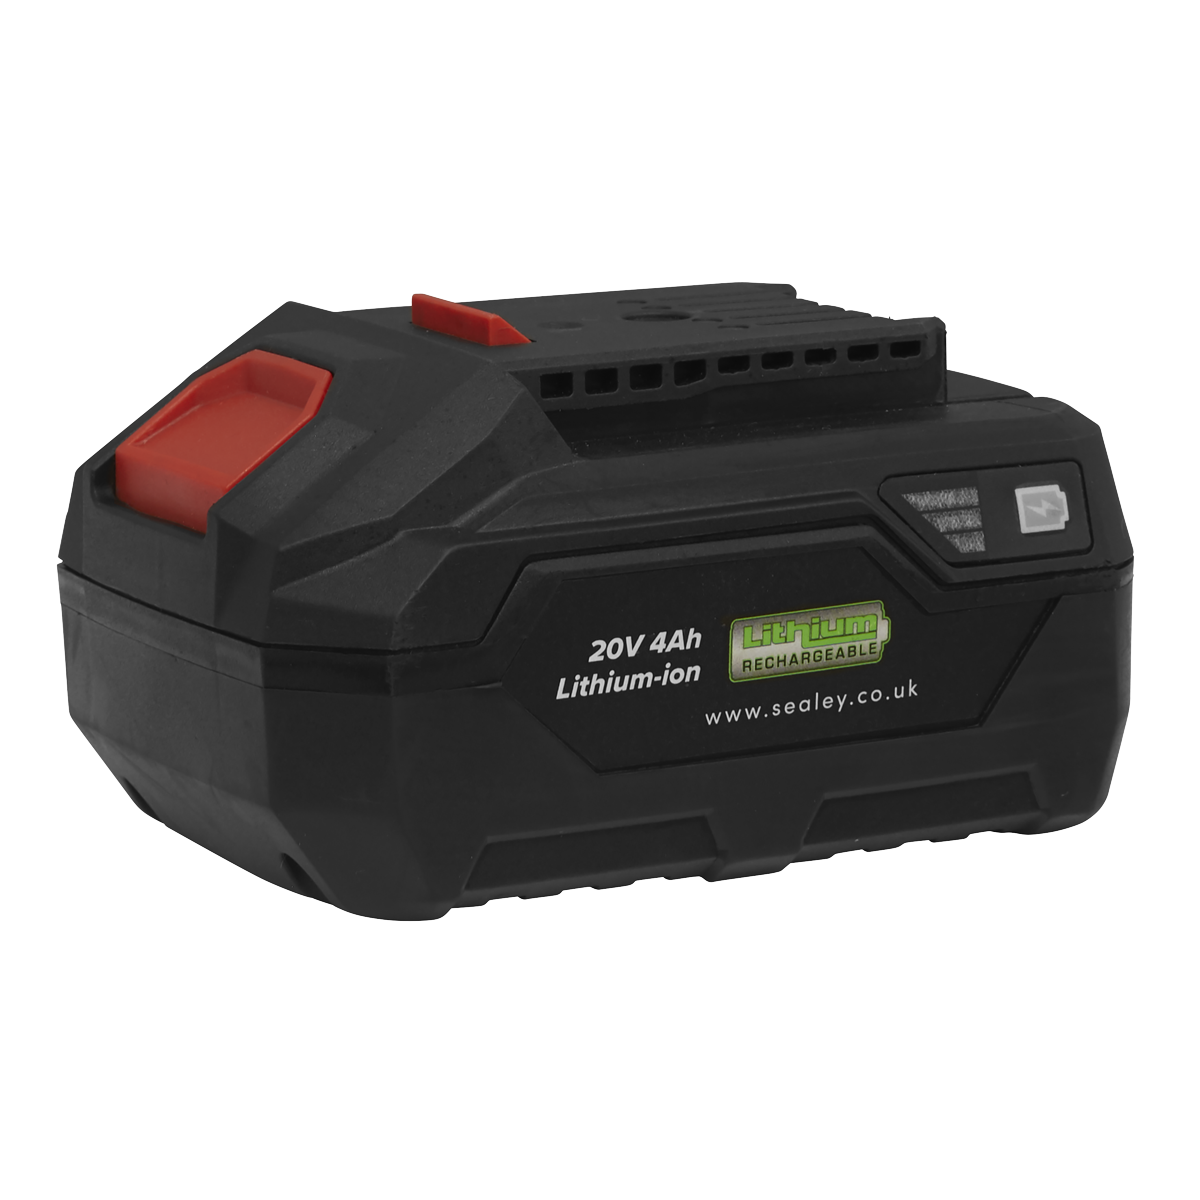 CP20VBP4 - Power Tool Battery 20V 4Ah Lithium-ion for SV20 Series (x2)